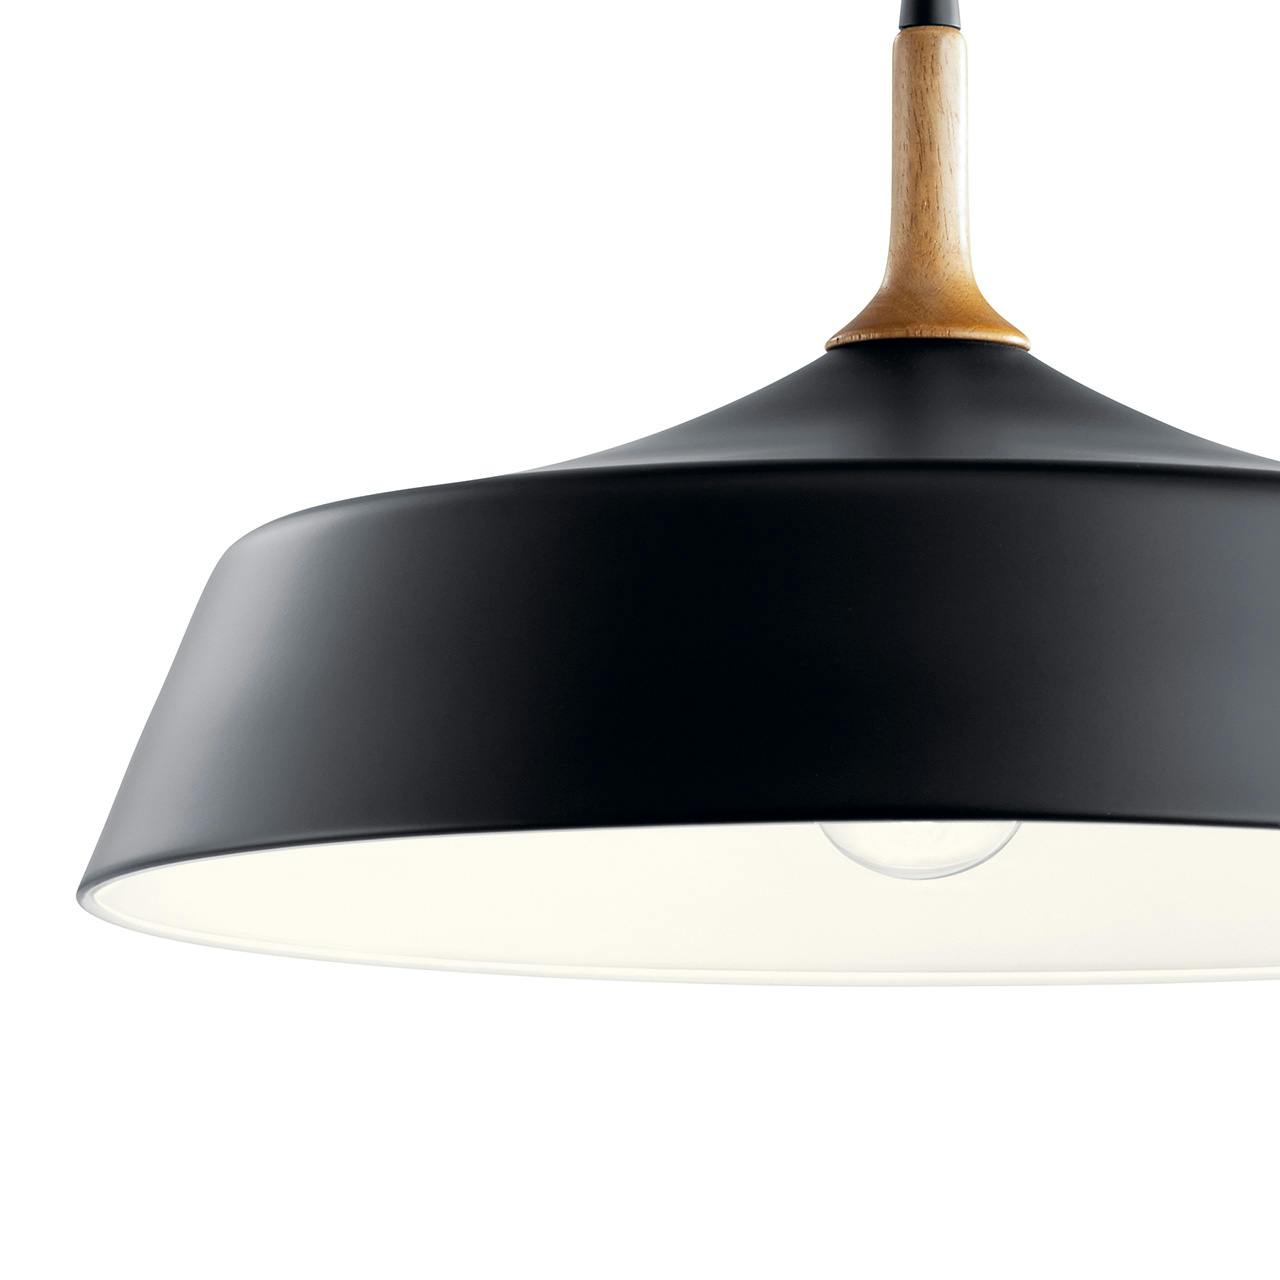 Close up view of the Danika 1 Light Pendant in Black on a white background